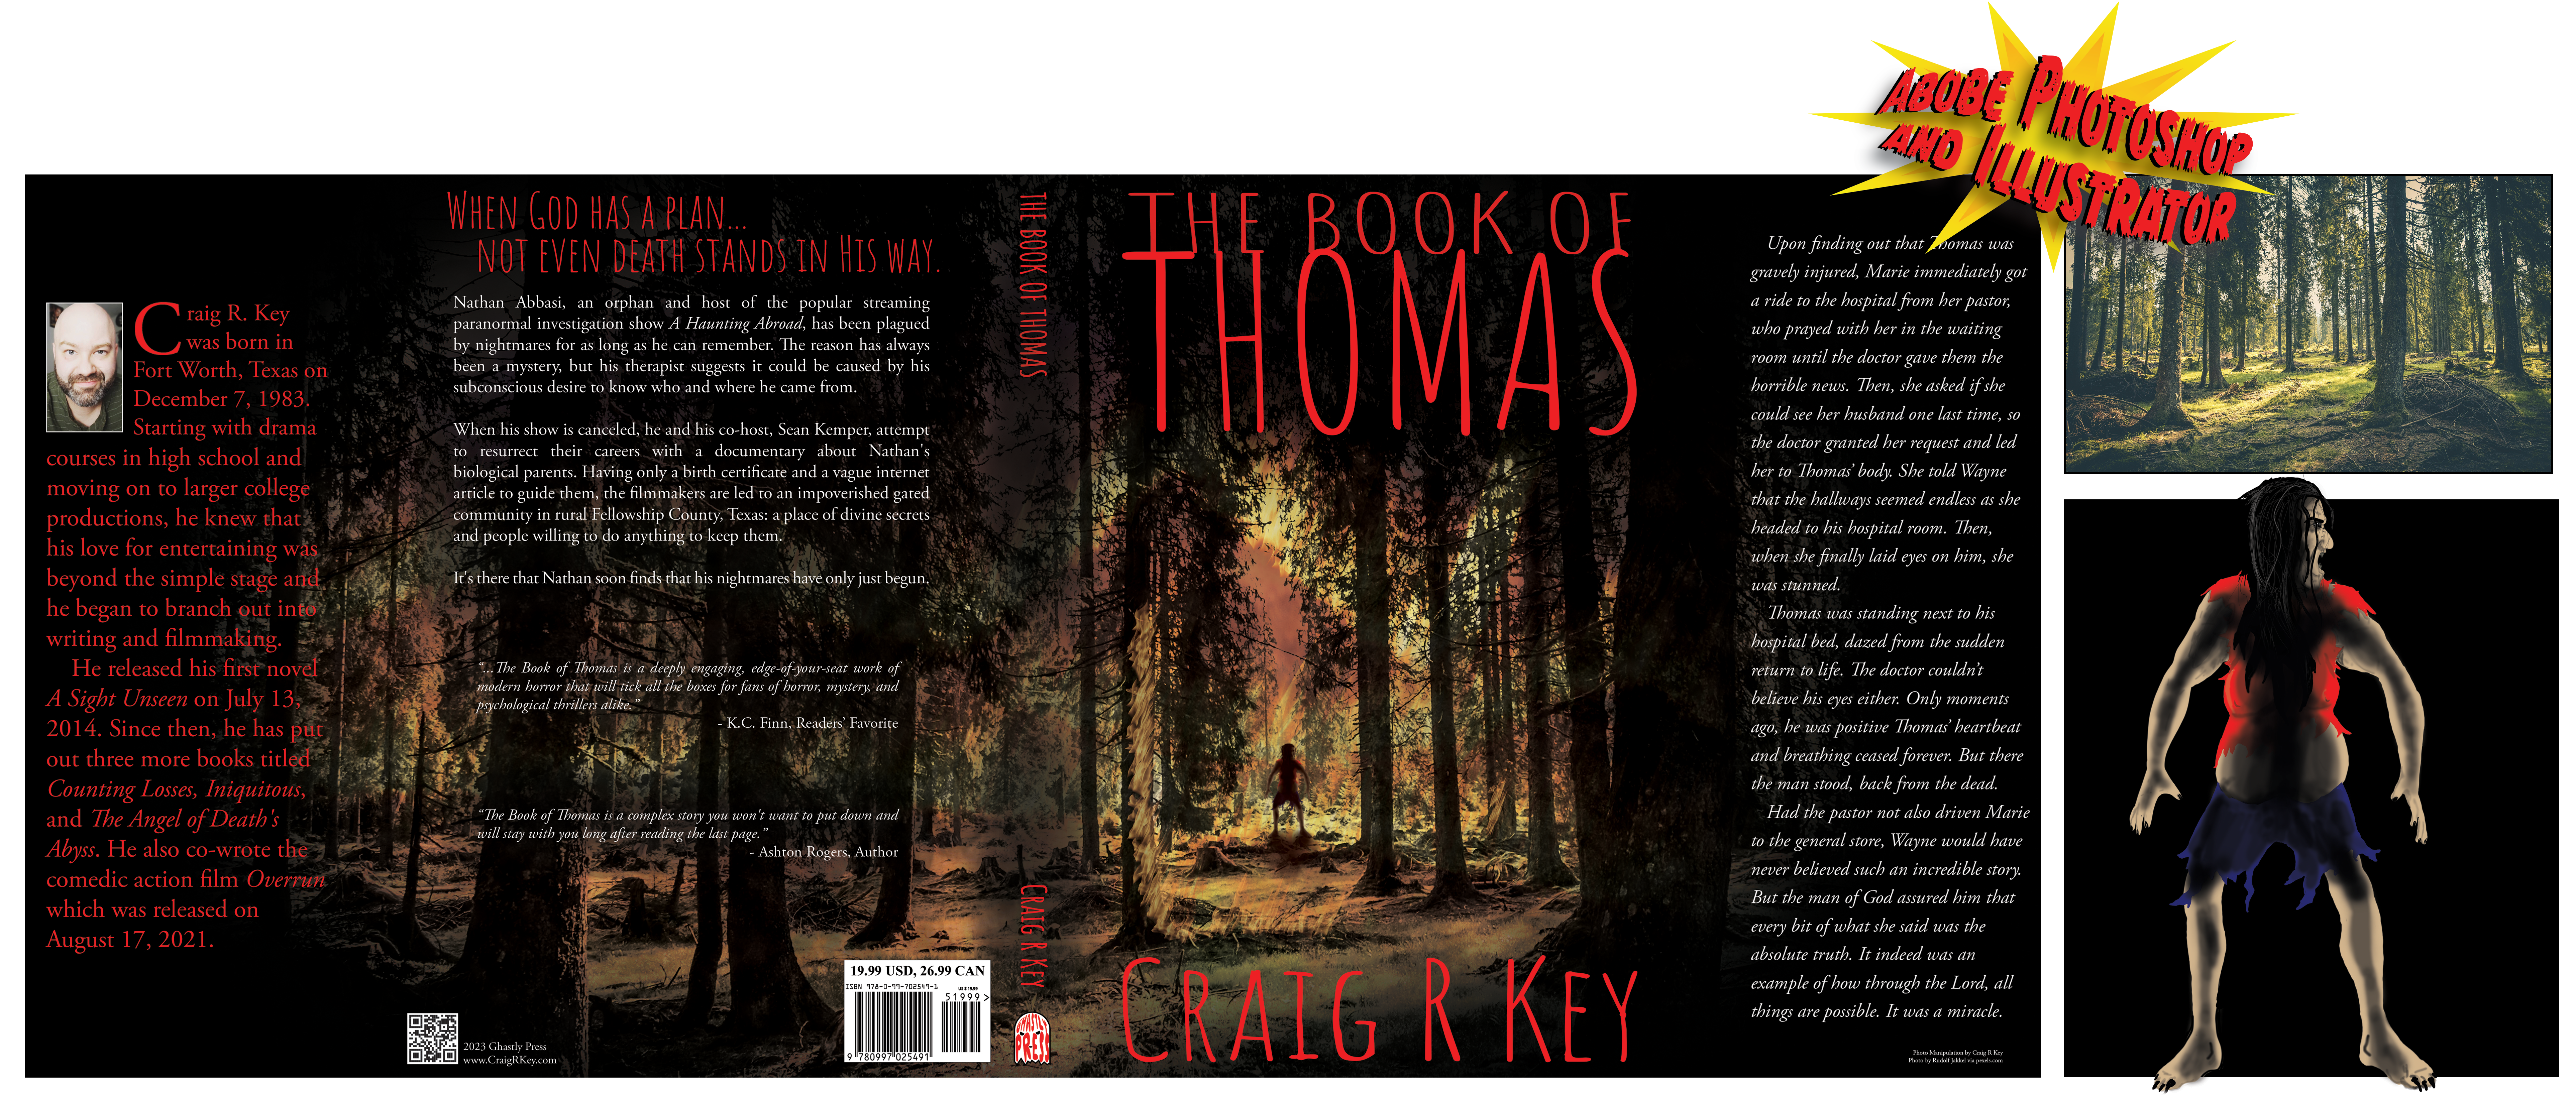 Dust jacket cover for The Book of Thomas. Created with Adobe Photoshop and Illustrator.